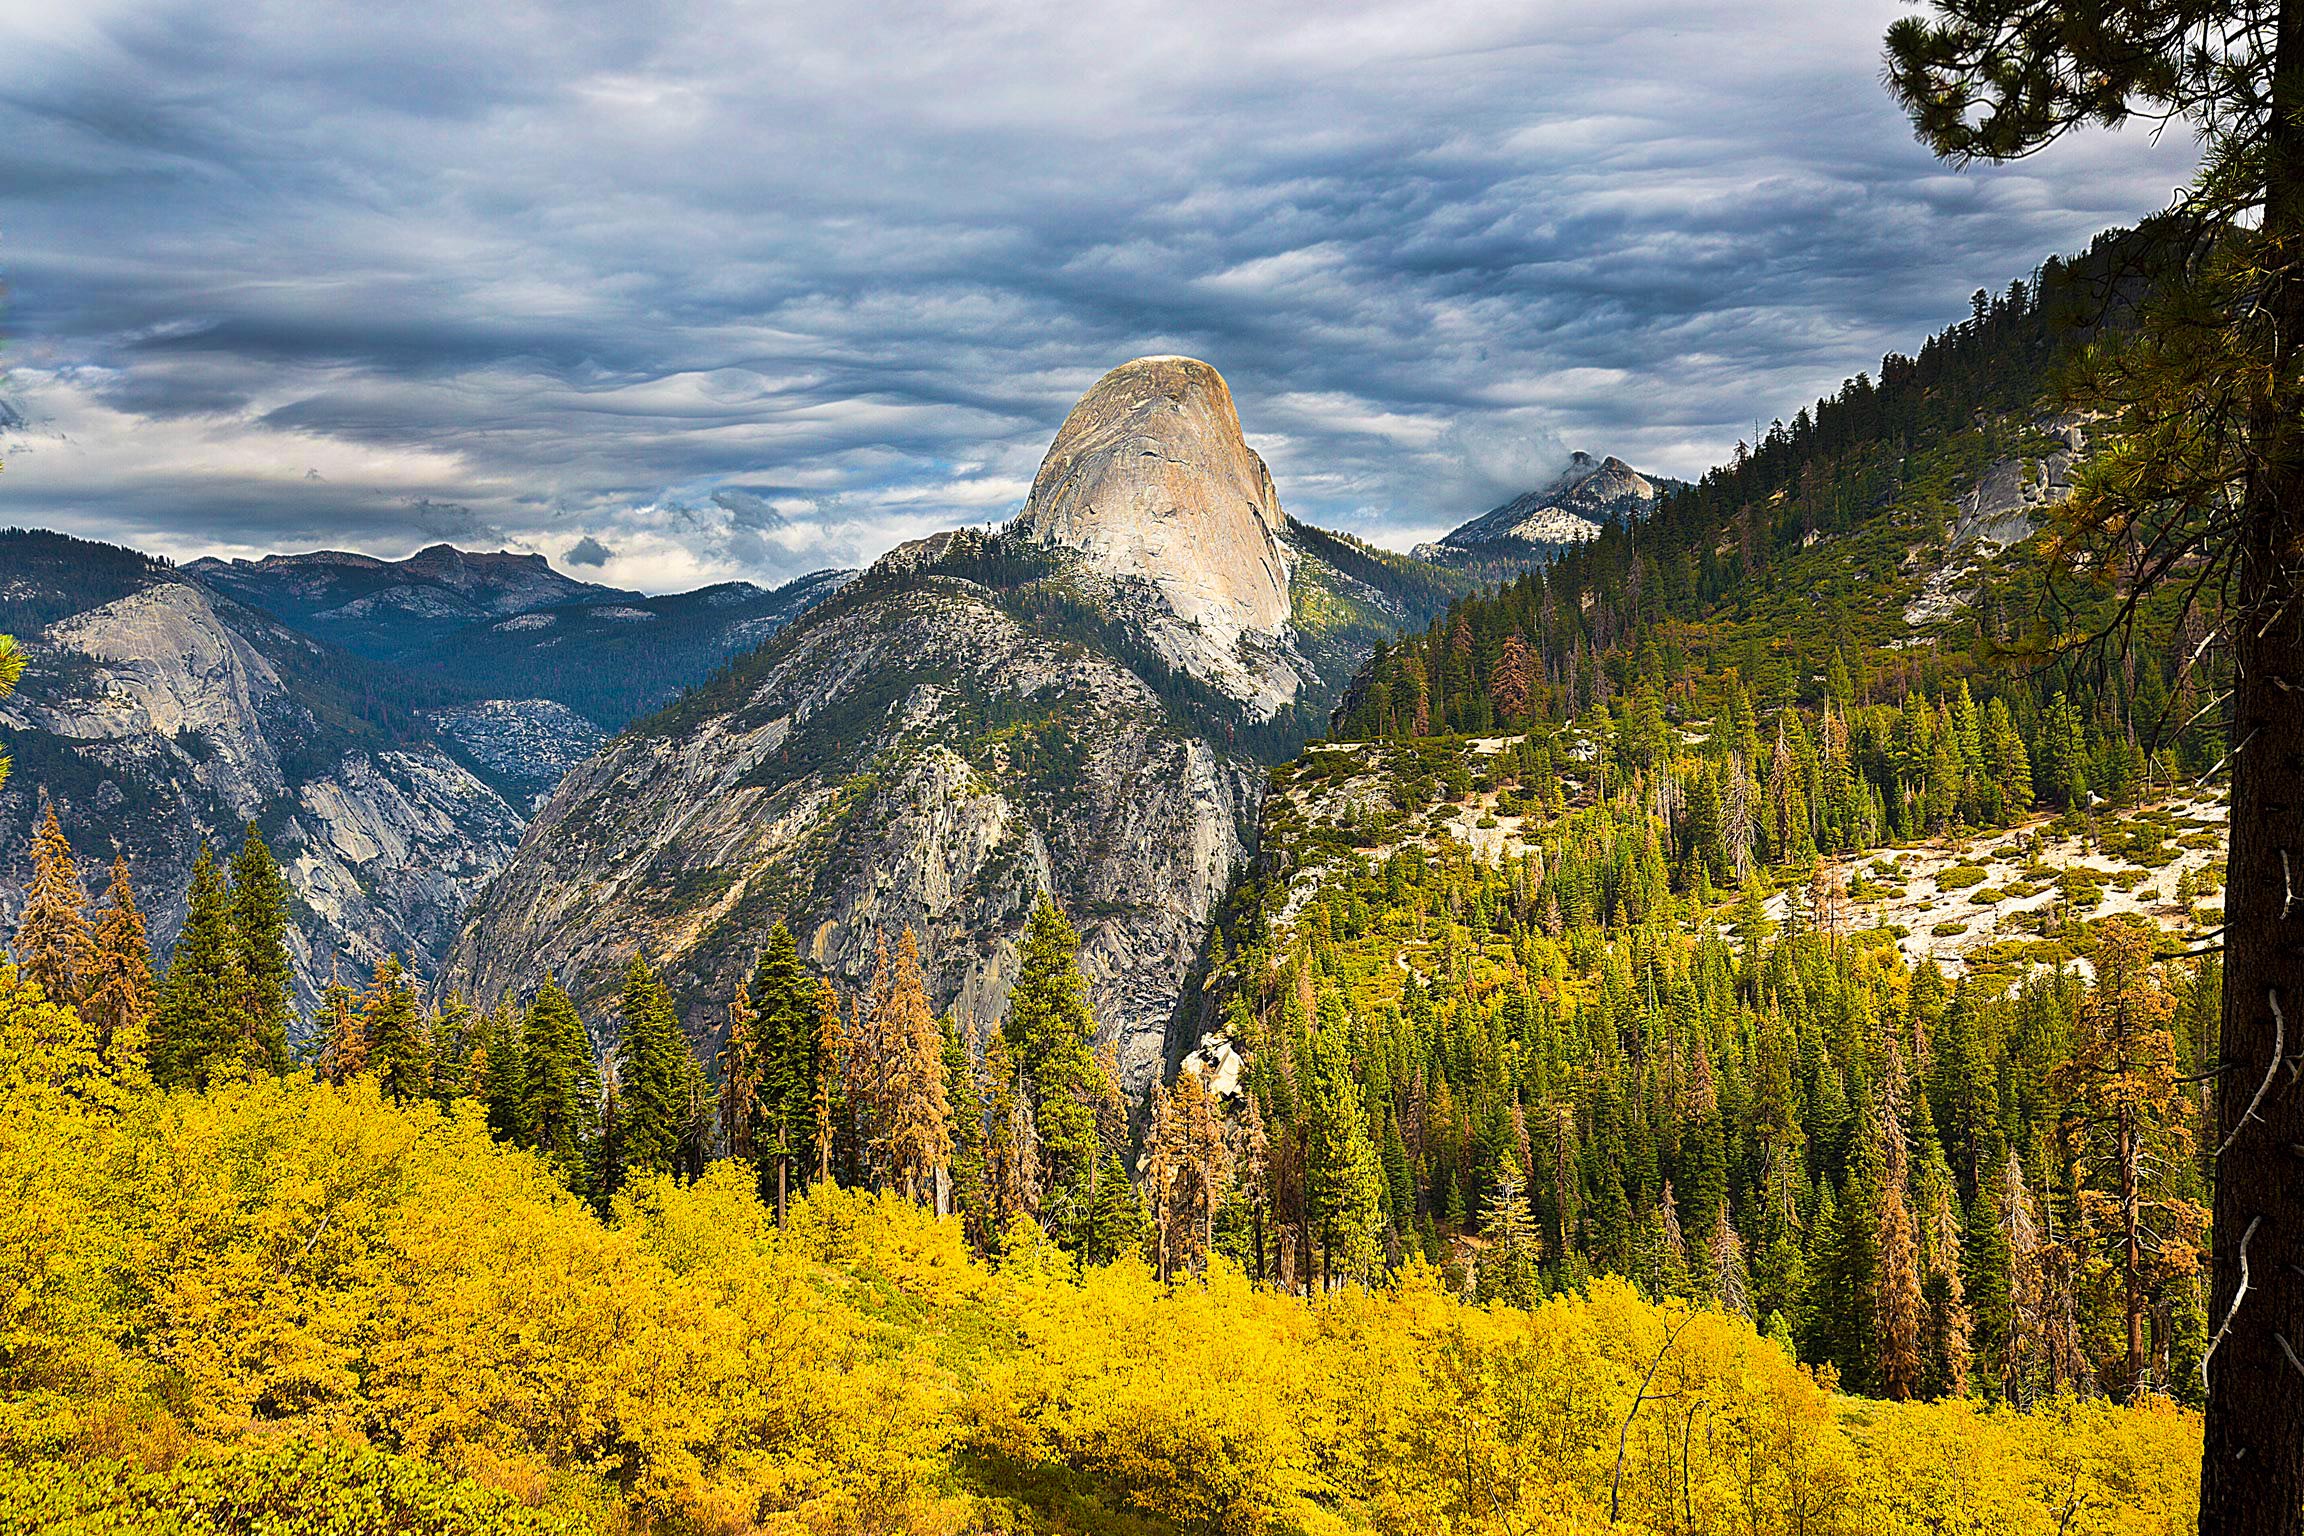 The Half-Dome from the backside with beautiful Fall leaves in the foreground- this was taken right near the junction between the John Muir Trail and the Panorama Trail.  